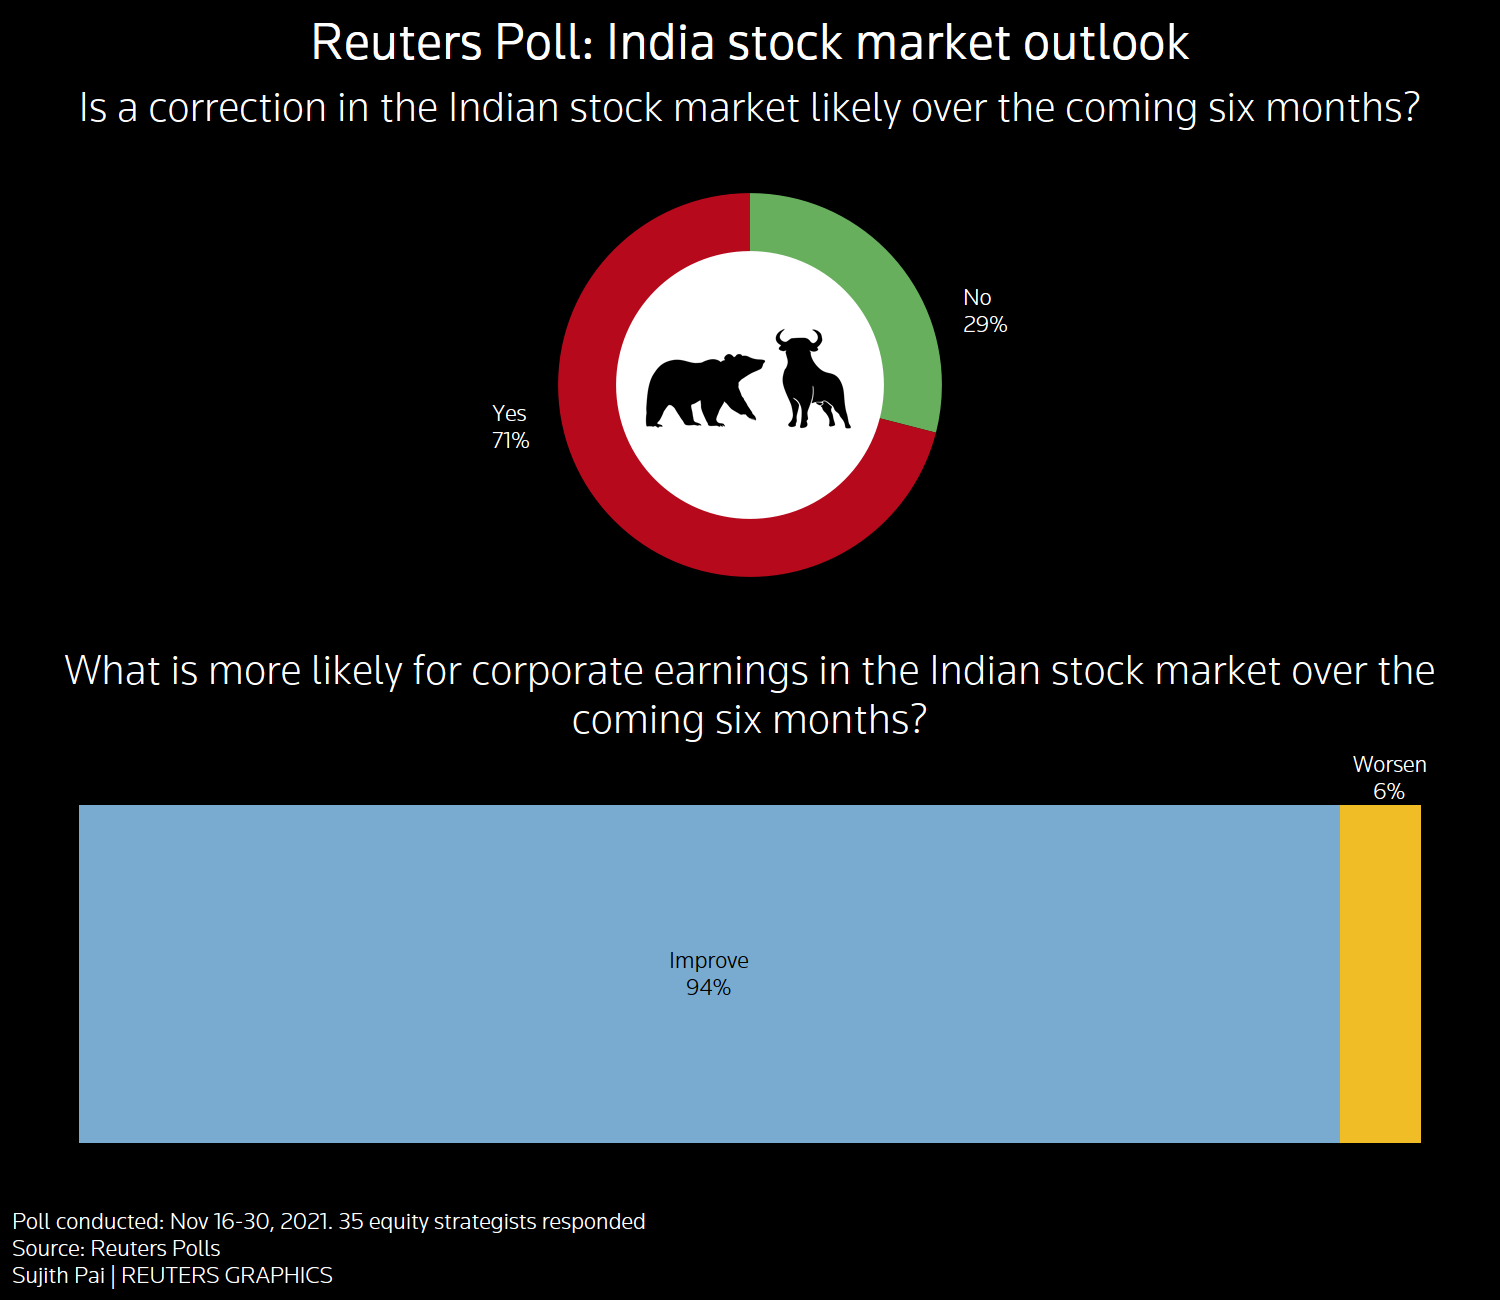 Reuters poll graphic on India stock market outlook